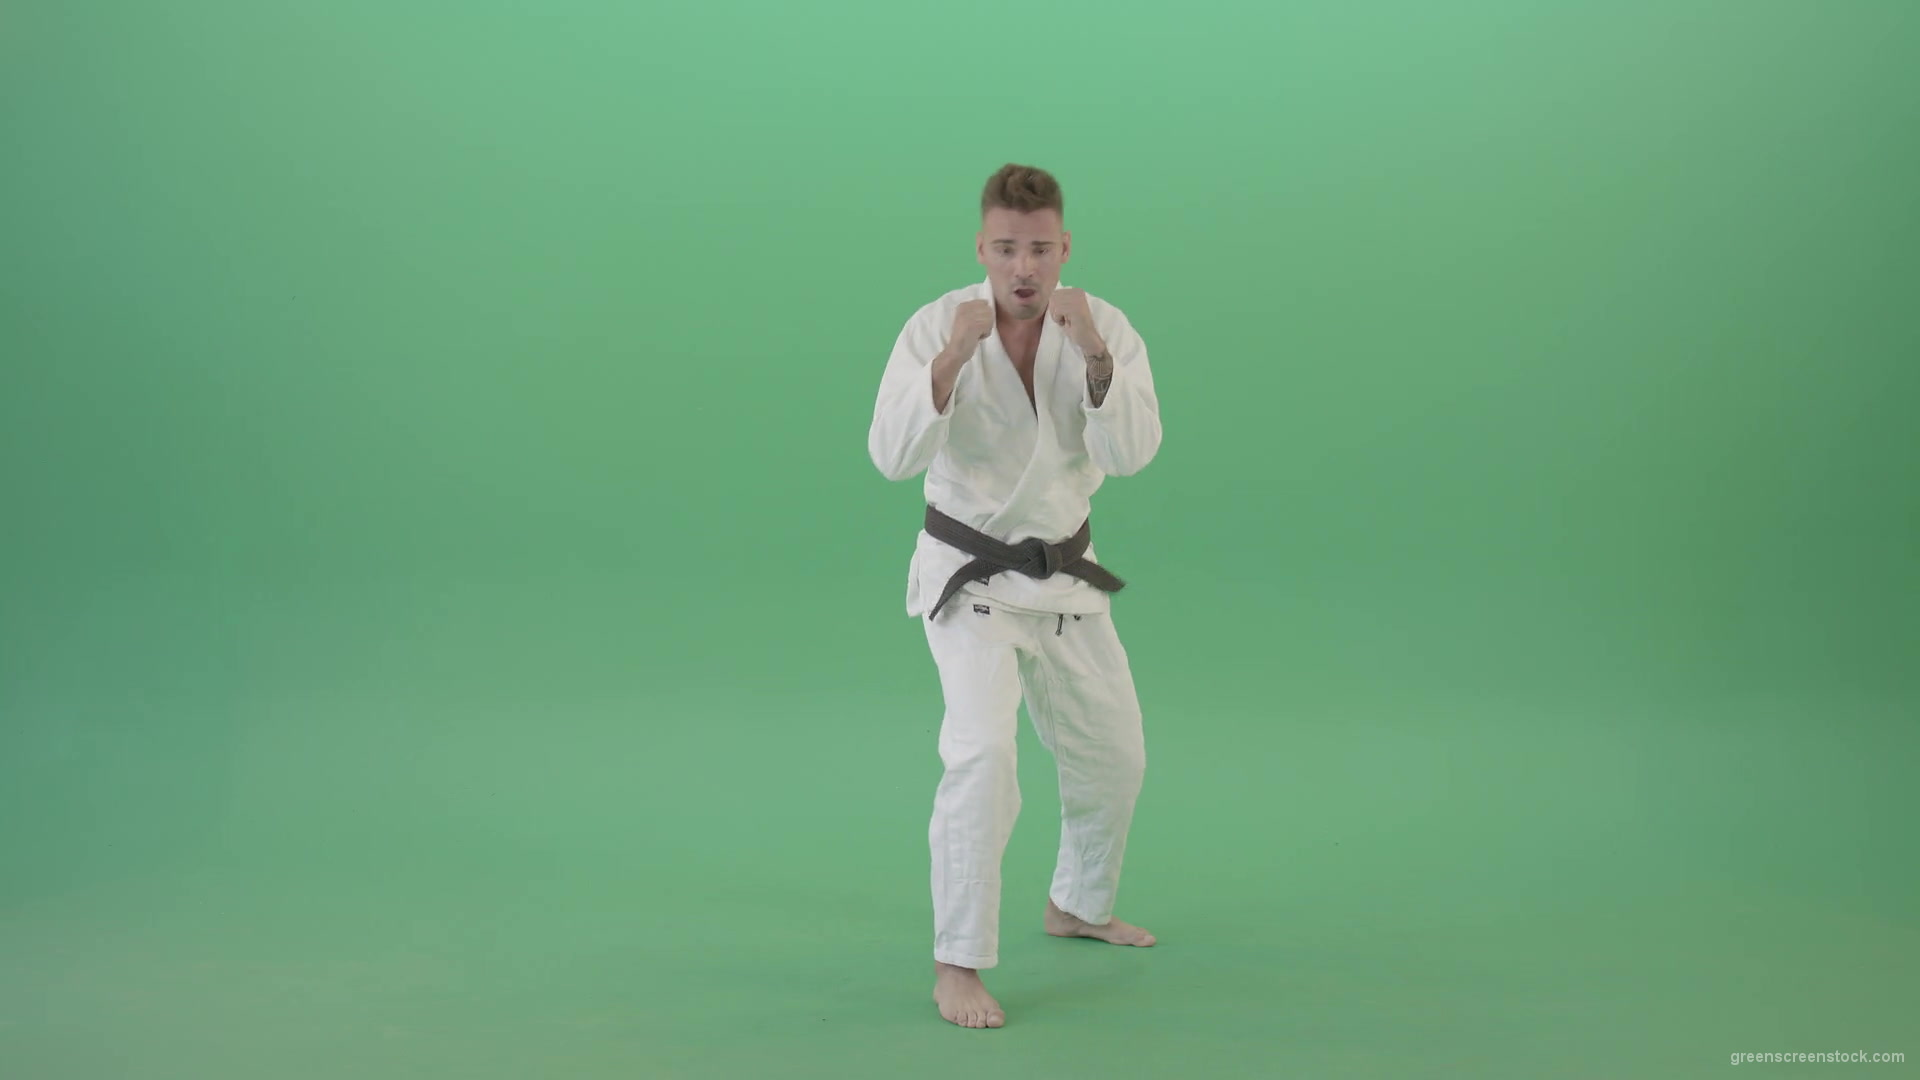 Karate-Man-boxing-making-punch-front-view-isolated-on-green-screen-1920_006 Green Screen Stock